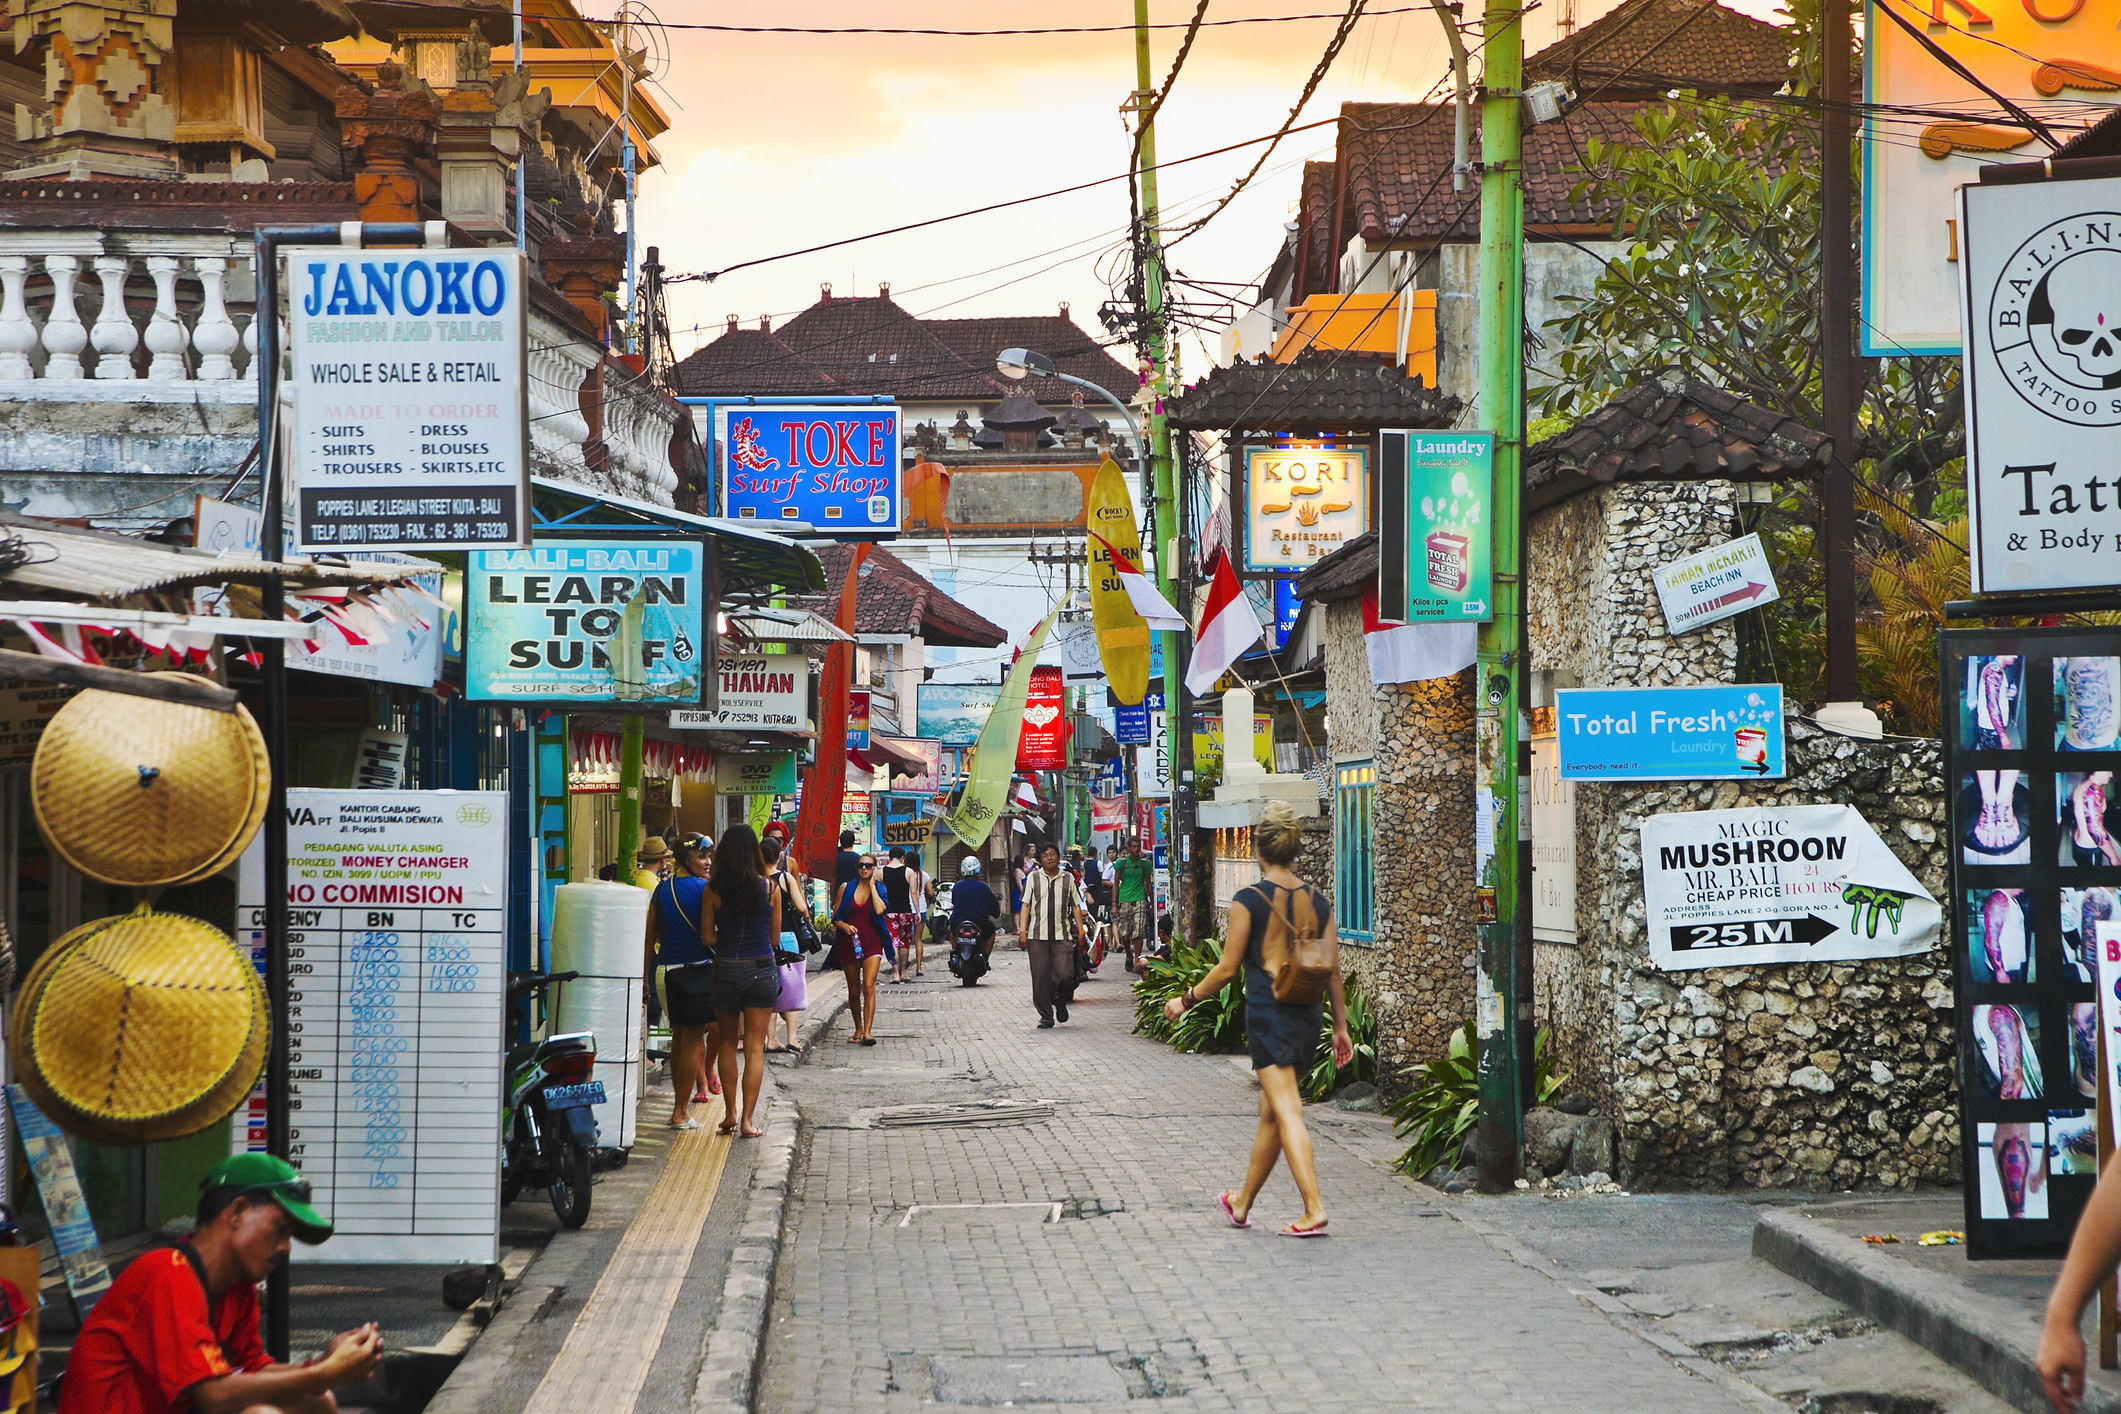 A street with lots of restaurant and shop signs